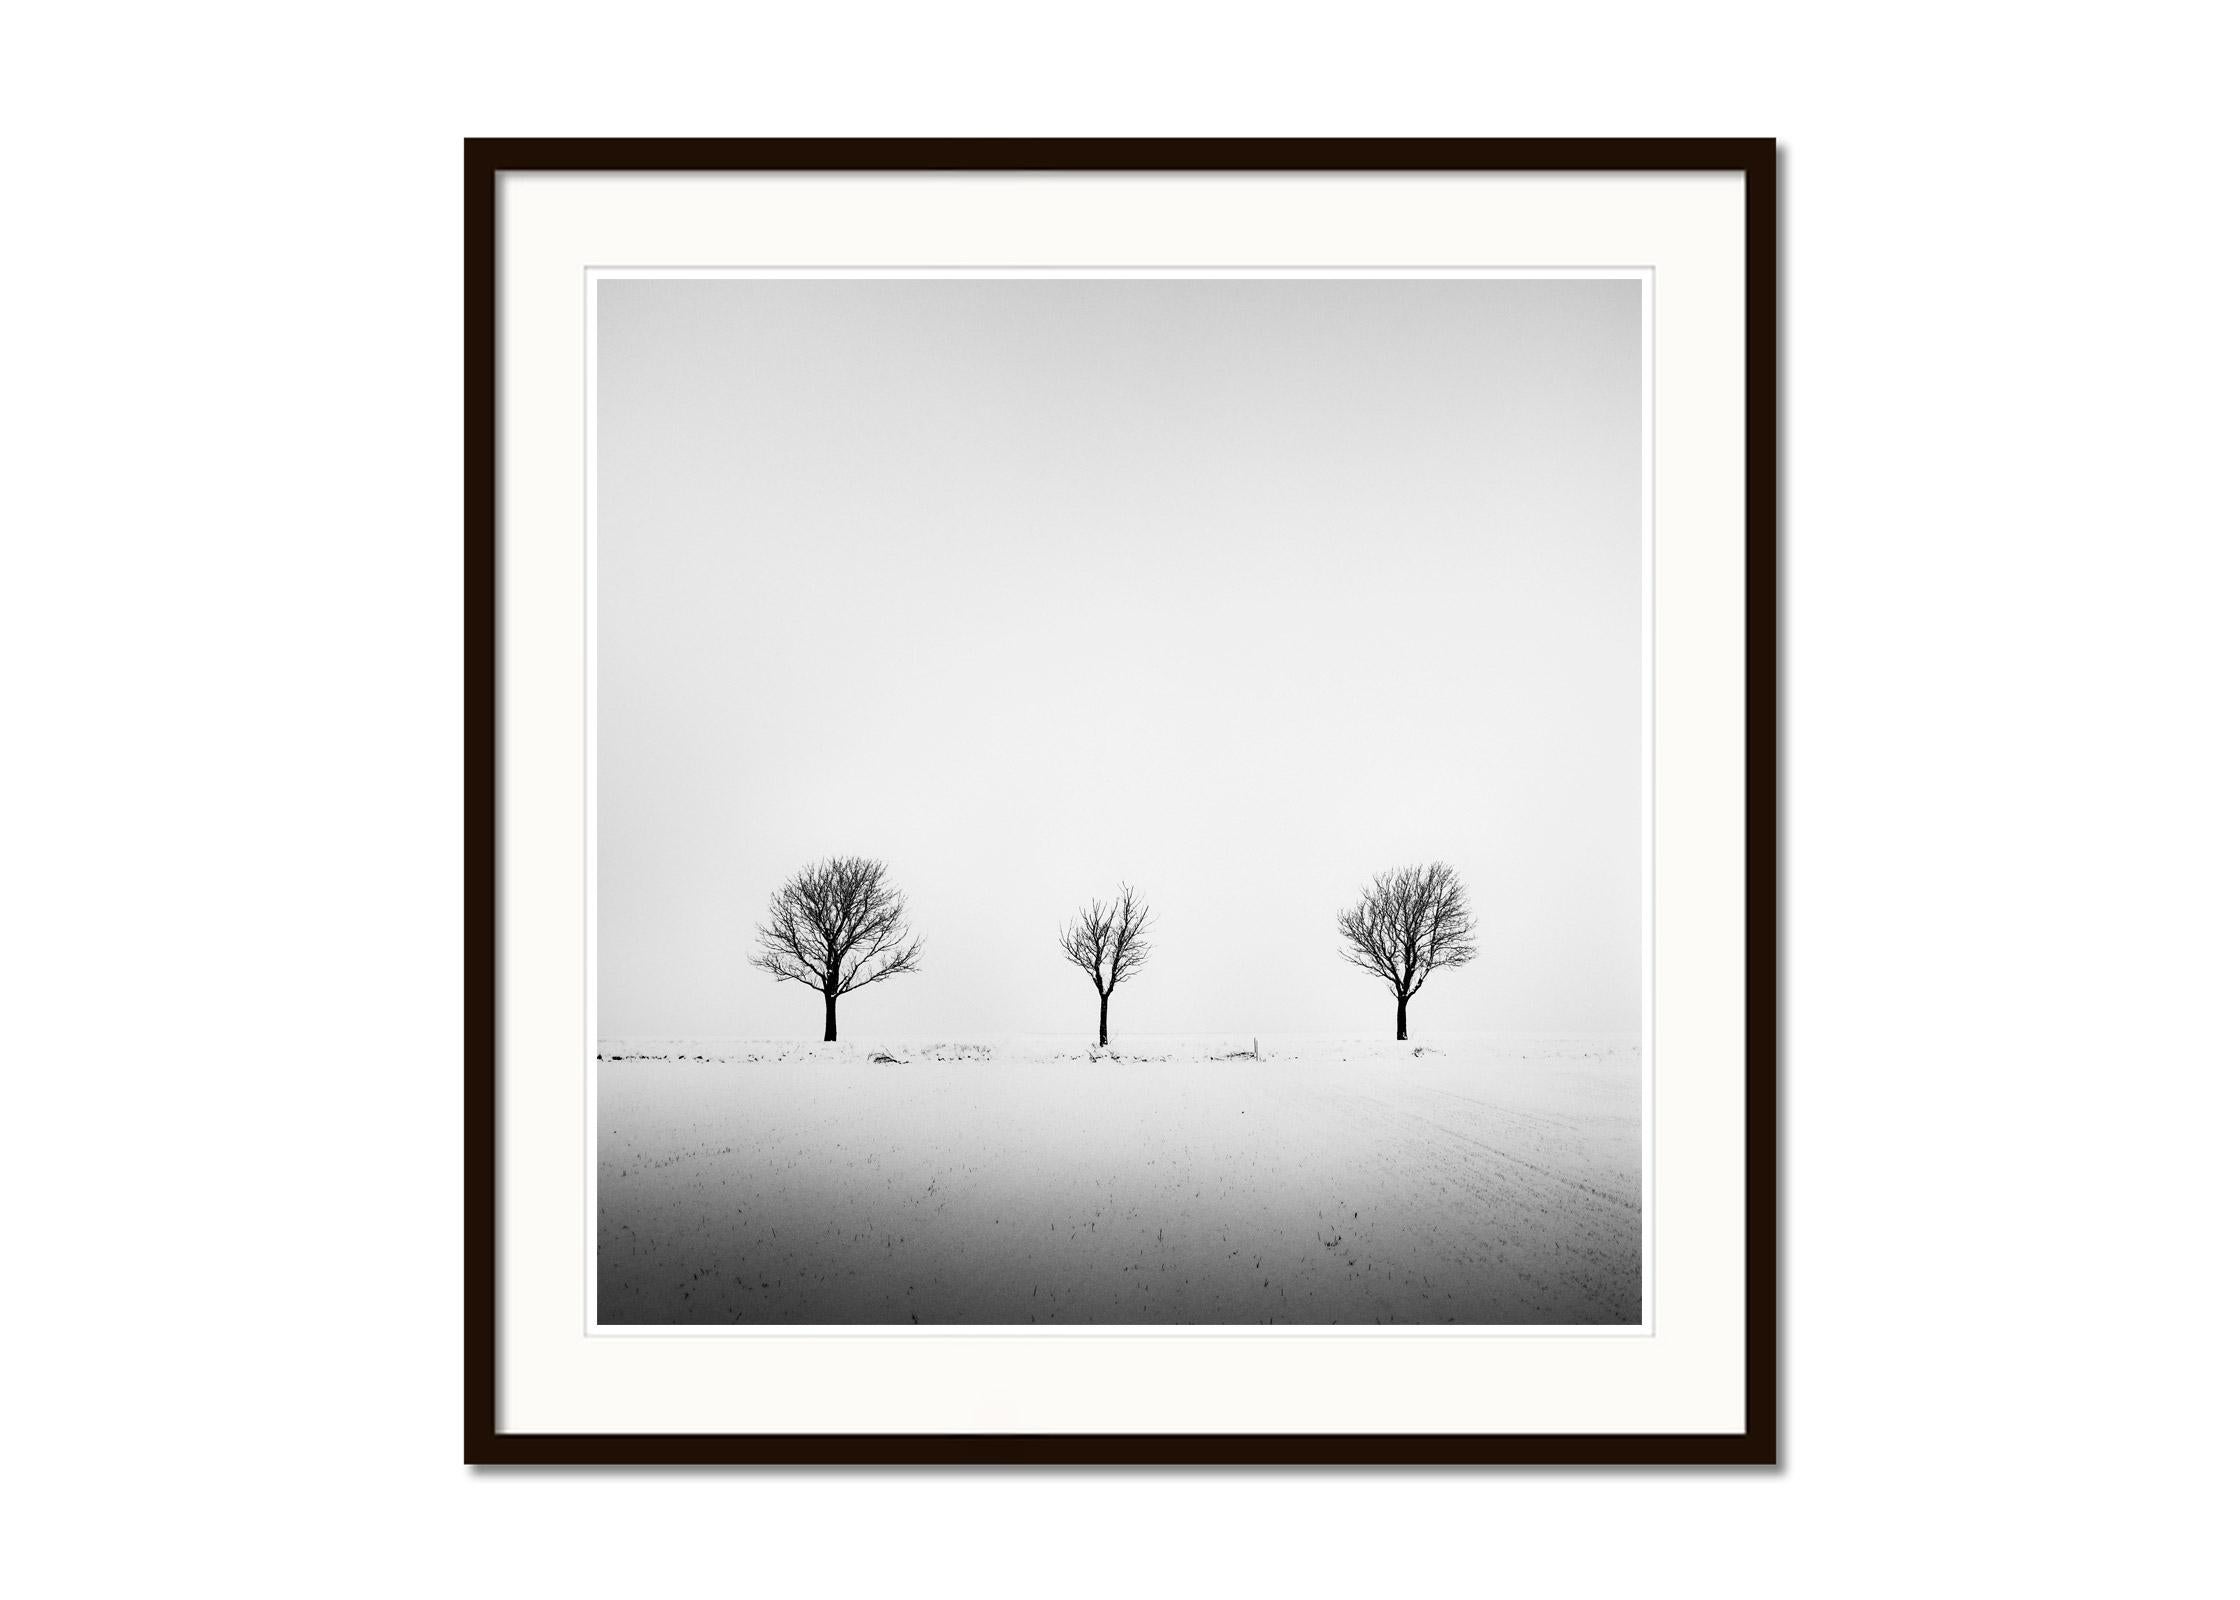 Trees in snowy Field, minimal art, black and white photography, landscape - Gray Black and White Photograph by Gerald Berghammer